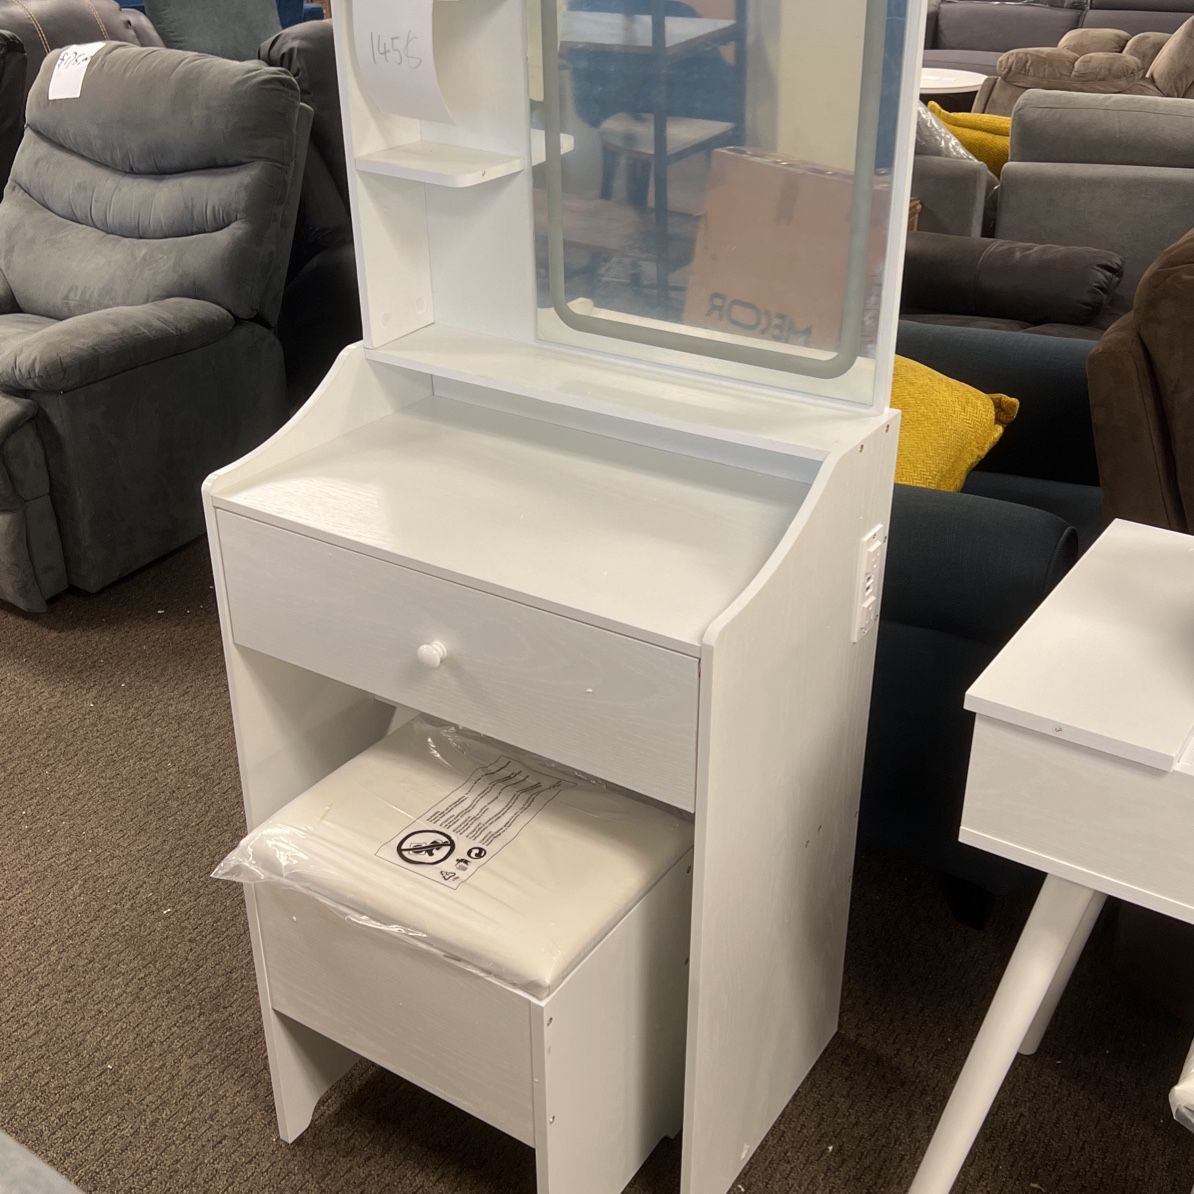 Small Makeup Vanity Desk with Mirror and Lights, Vanity Table Set with Storage Drawer & Chair & 3 Shelves, Bedroom, White